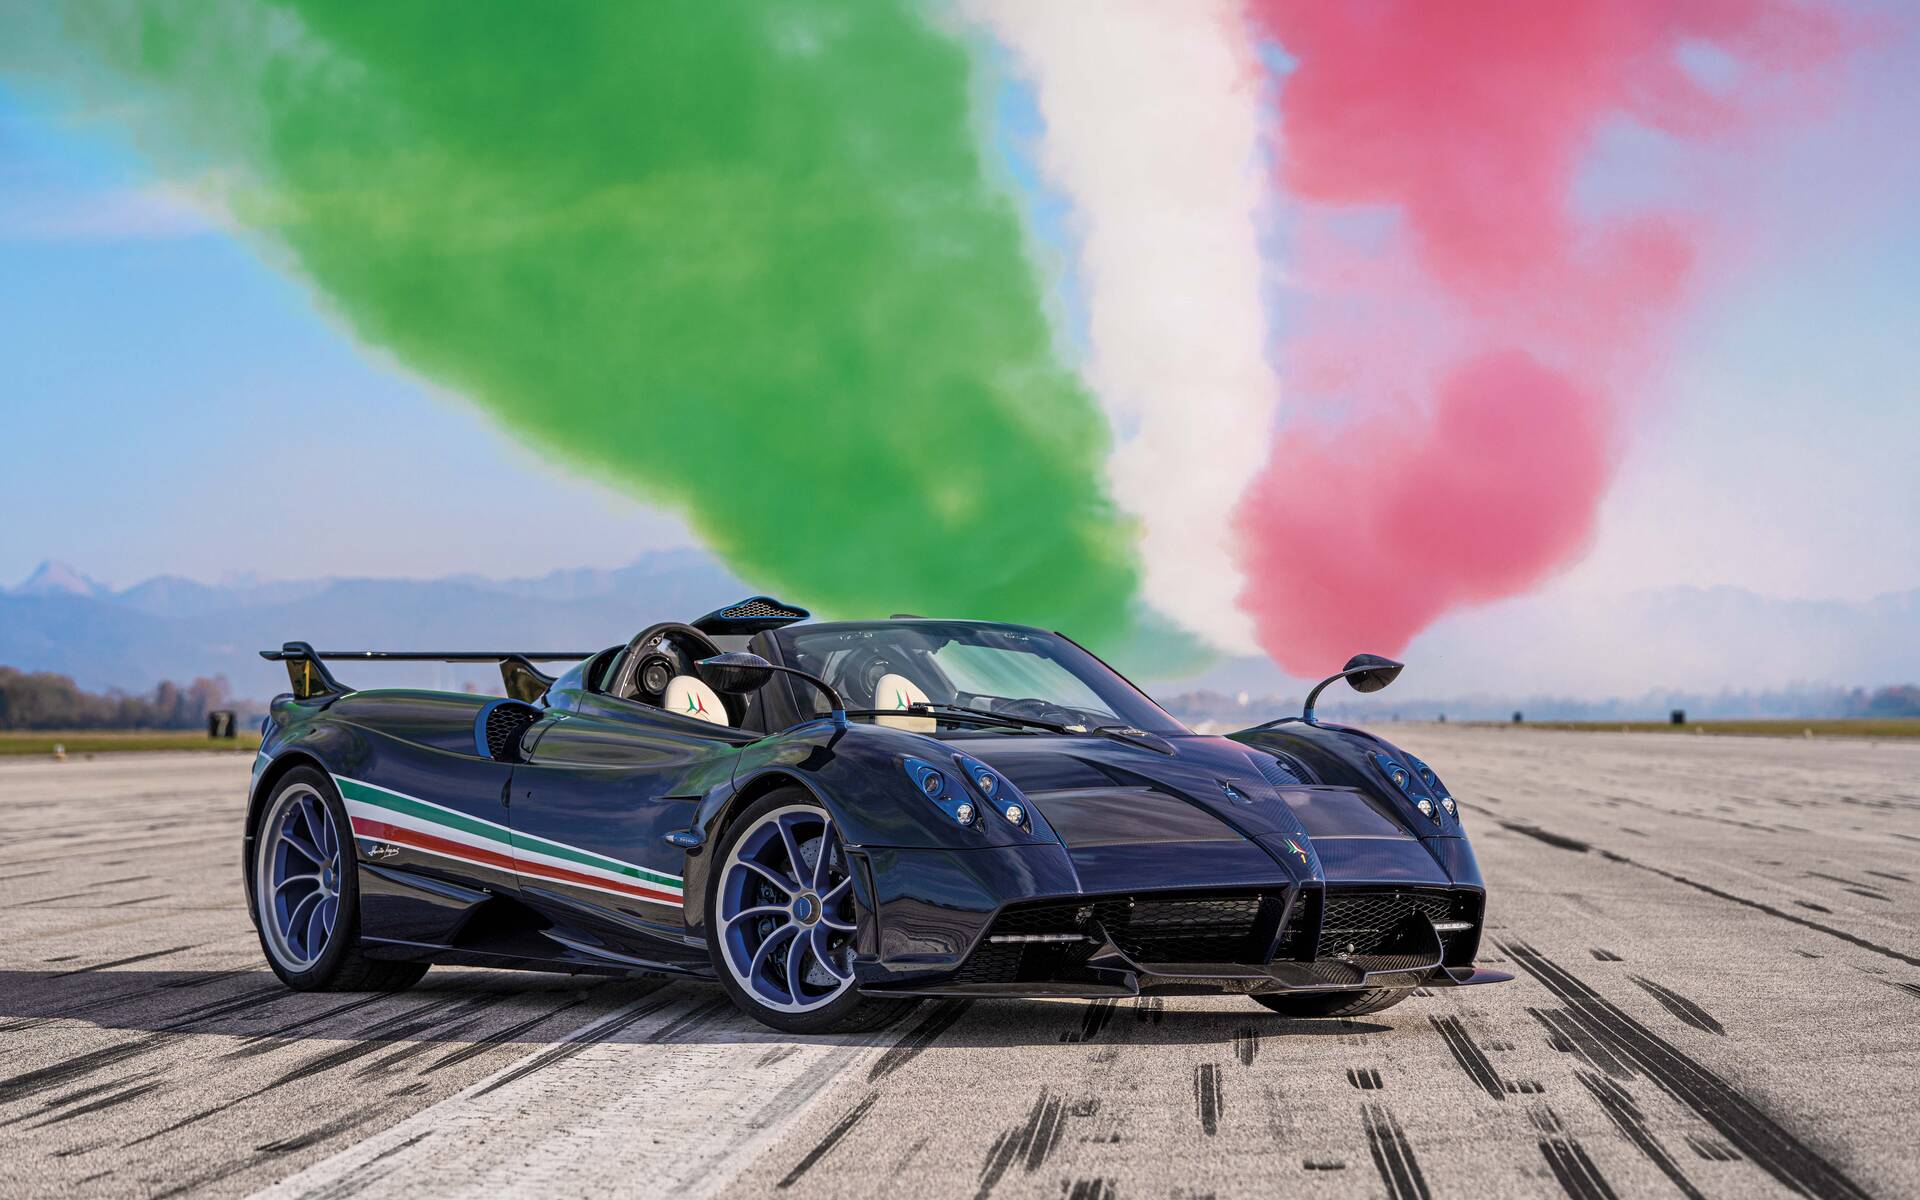 Pagani Huayra Tricolore 829 Horsepower for 8.6 Million